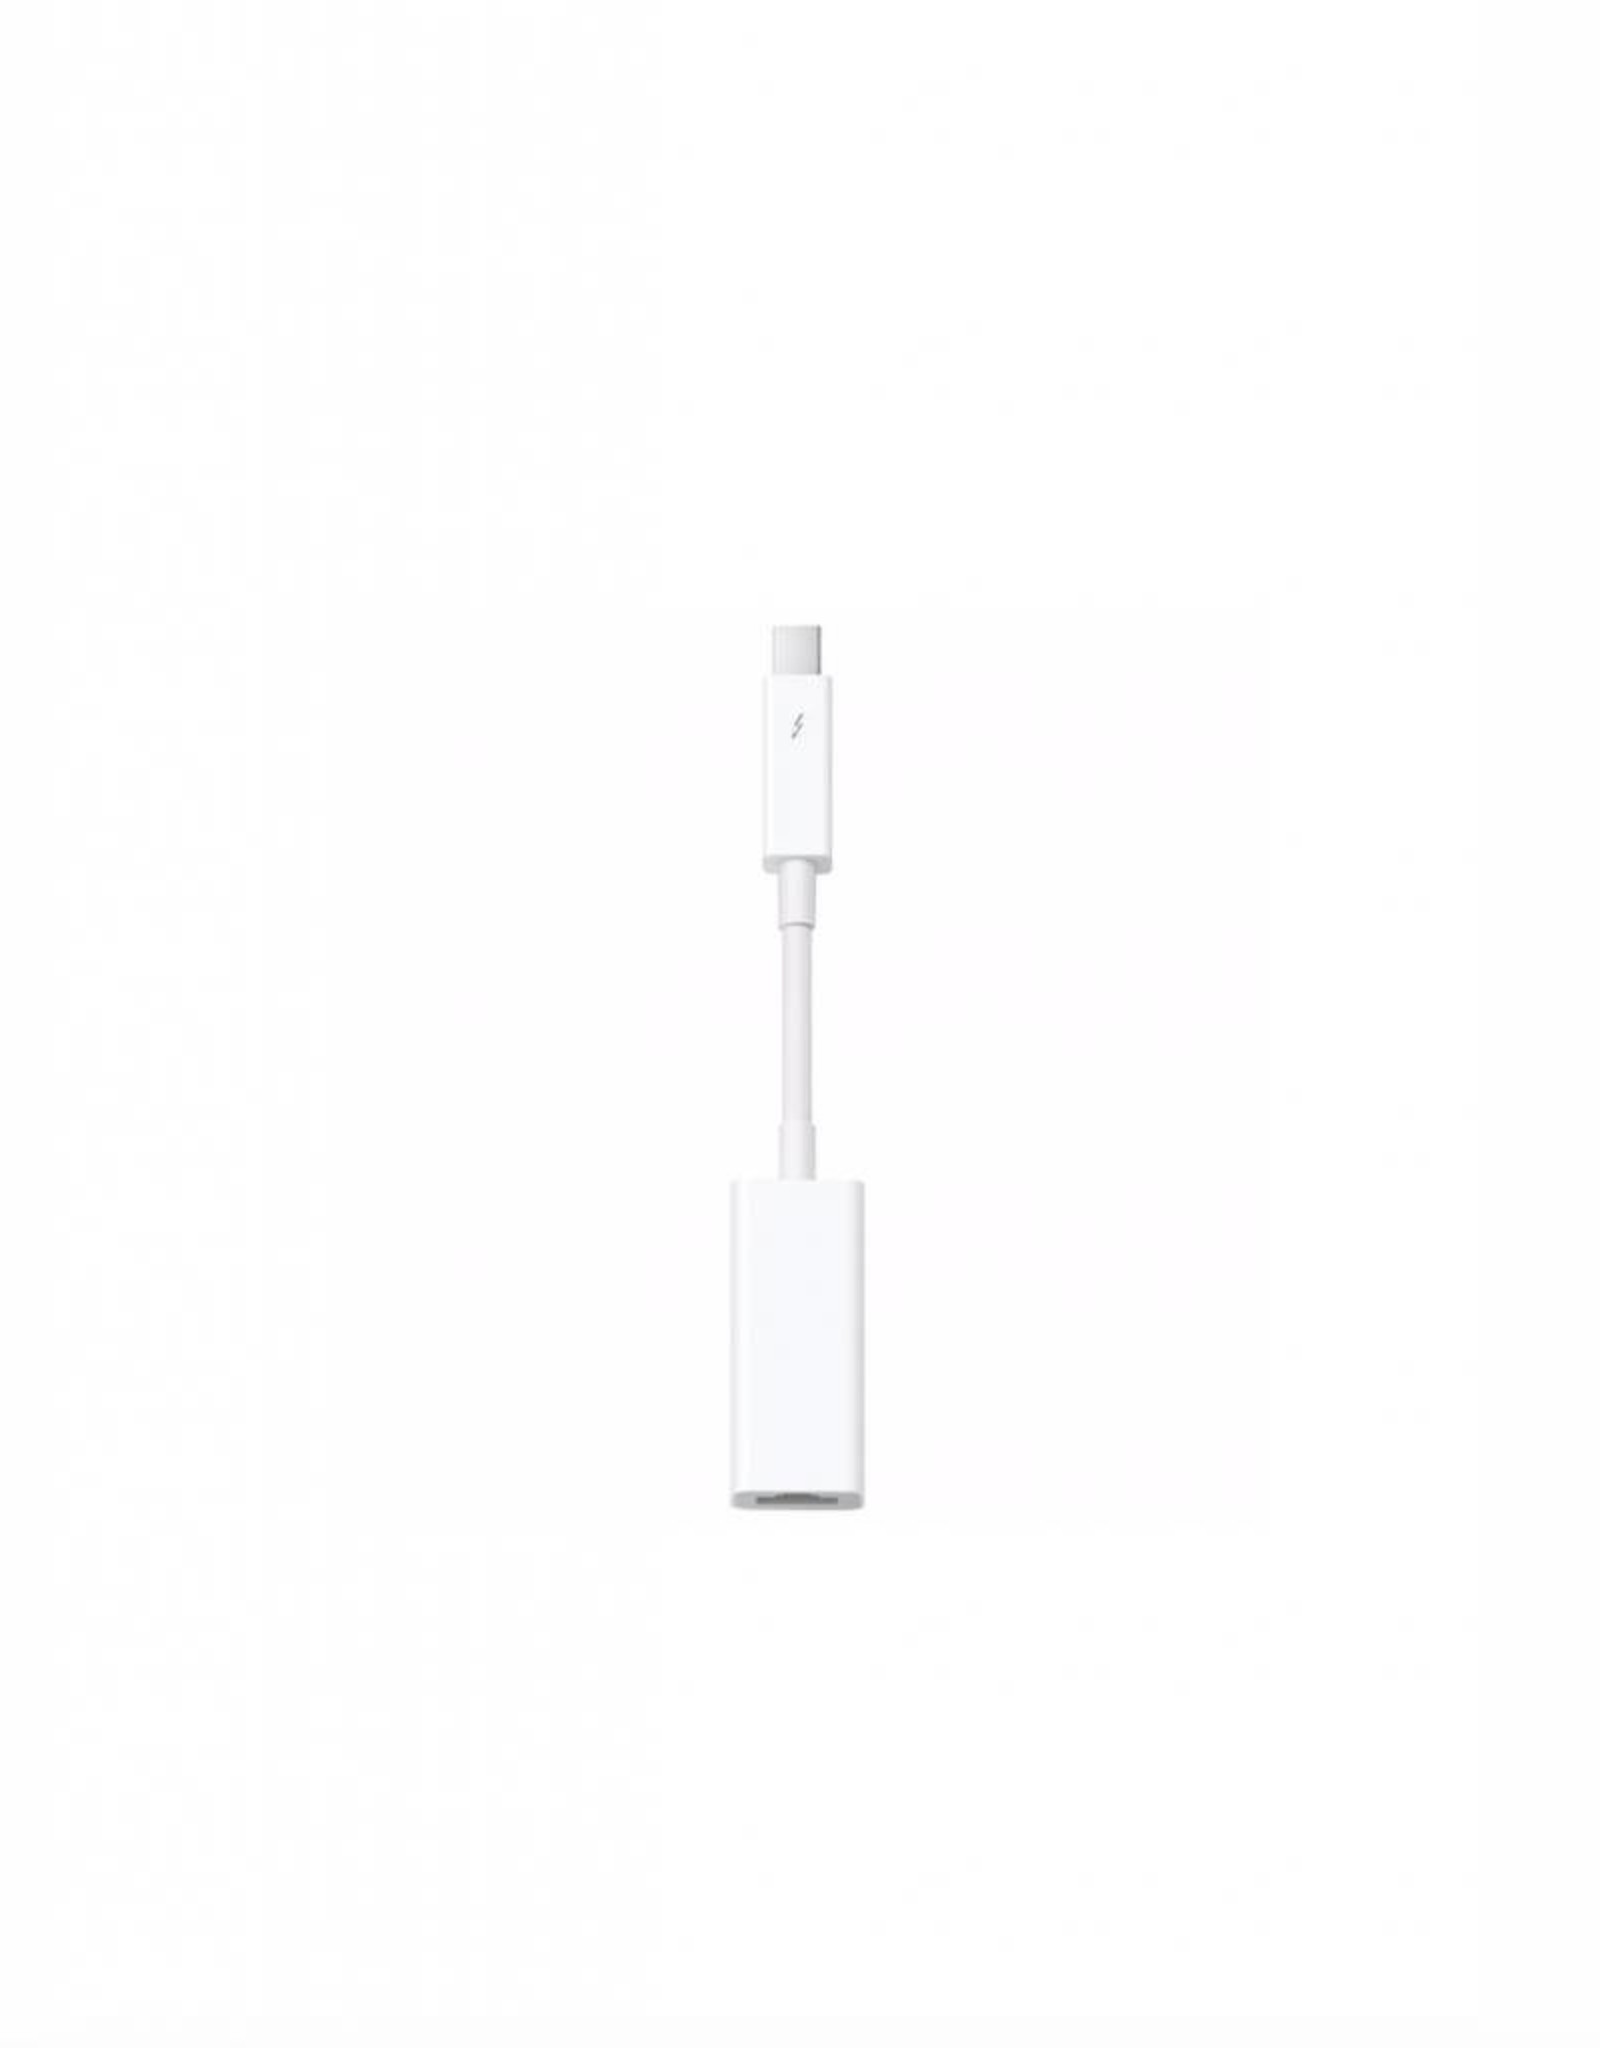 APPLE THUNDERBOLT TO GIGABIT ADAPTER - Dartmouth The Computer Store